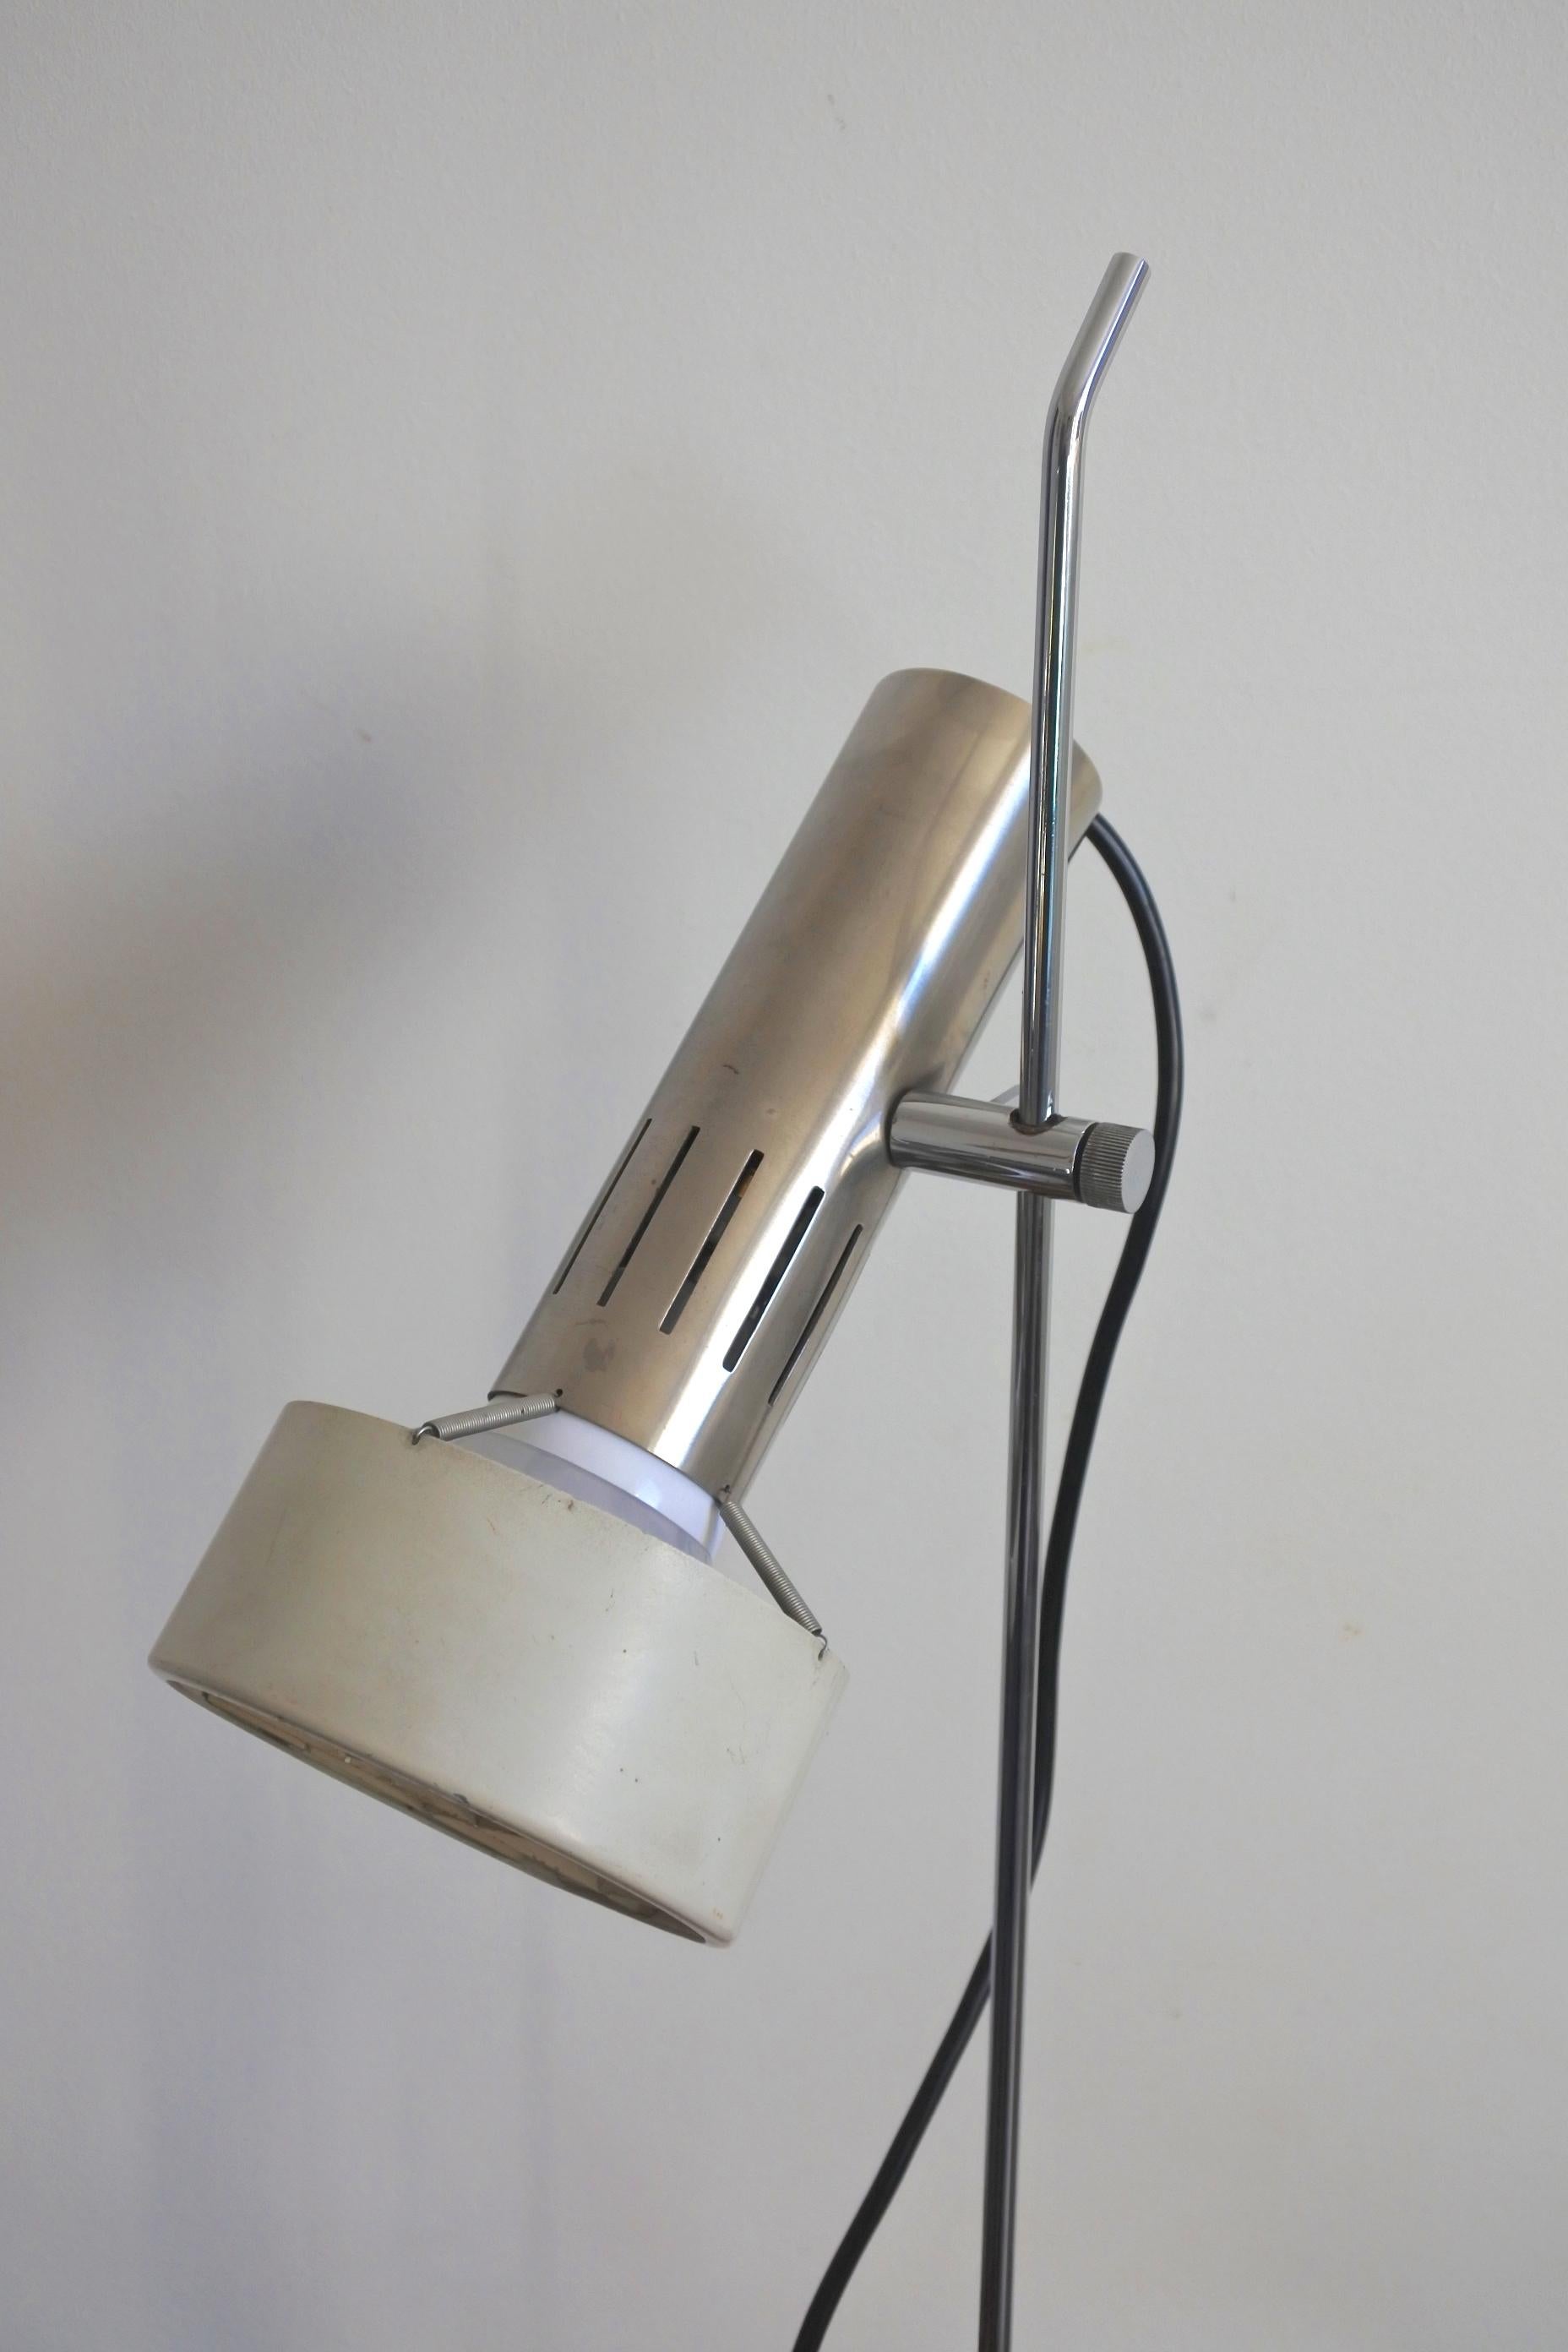 Alain Richard A4 Table Lamp with Marble Base, Ed Disderot, France, 1958 In Good Condition For Sale In La Teste De Buch, FR